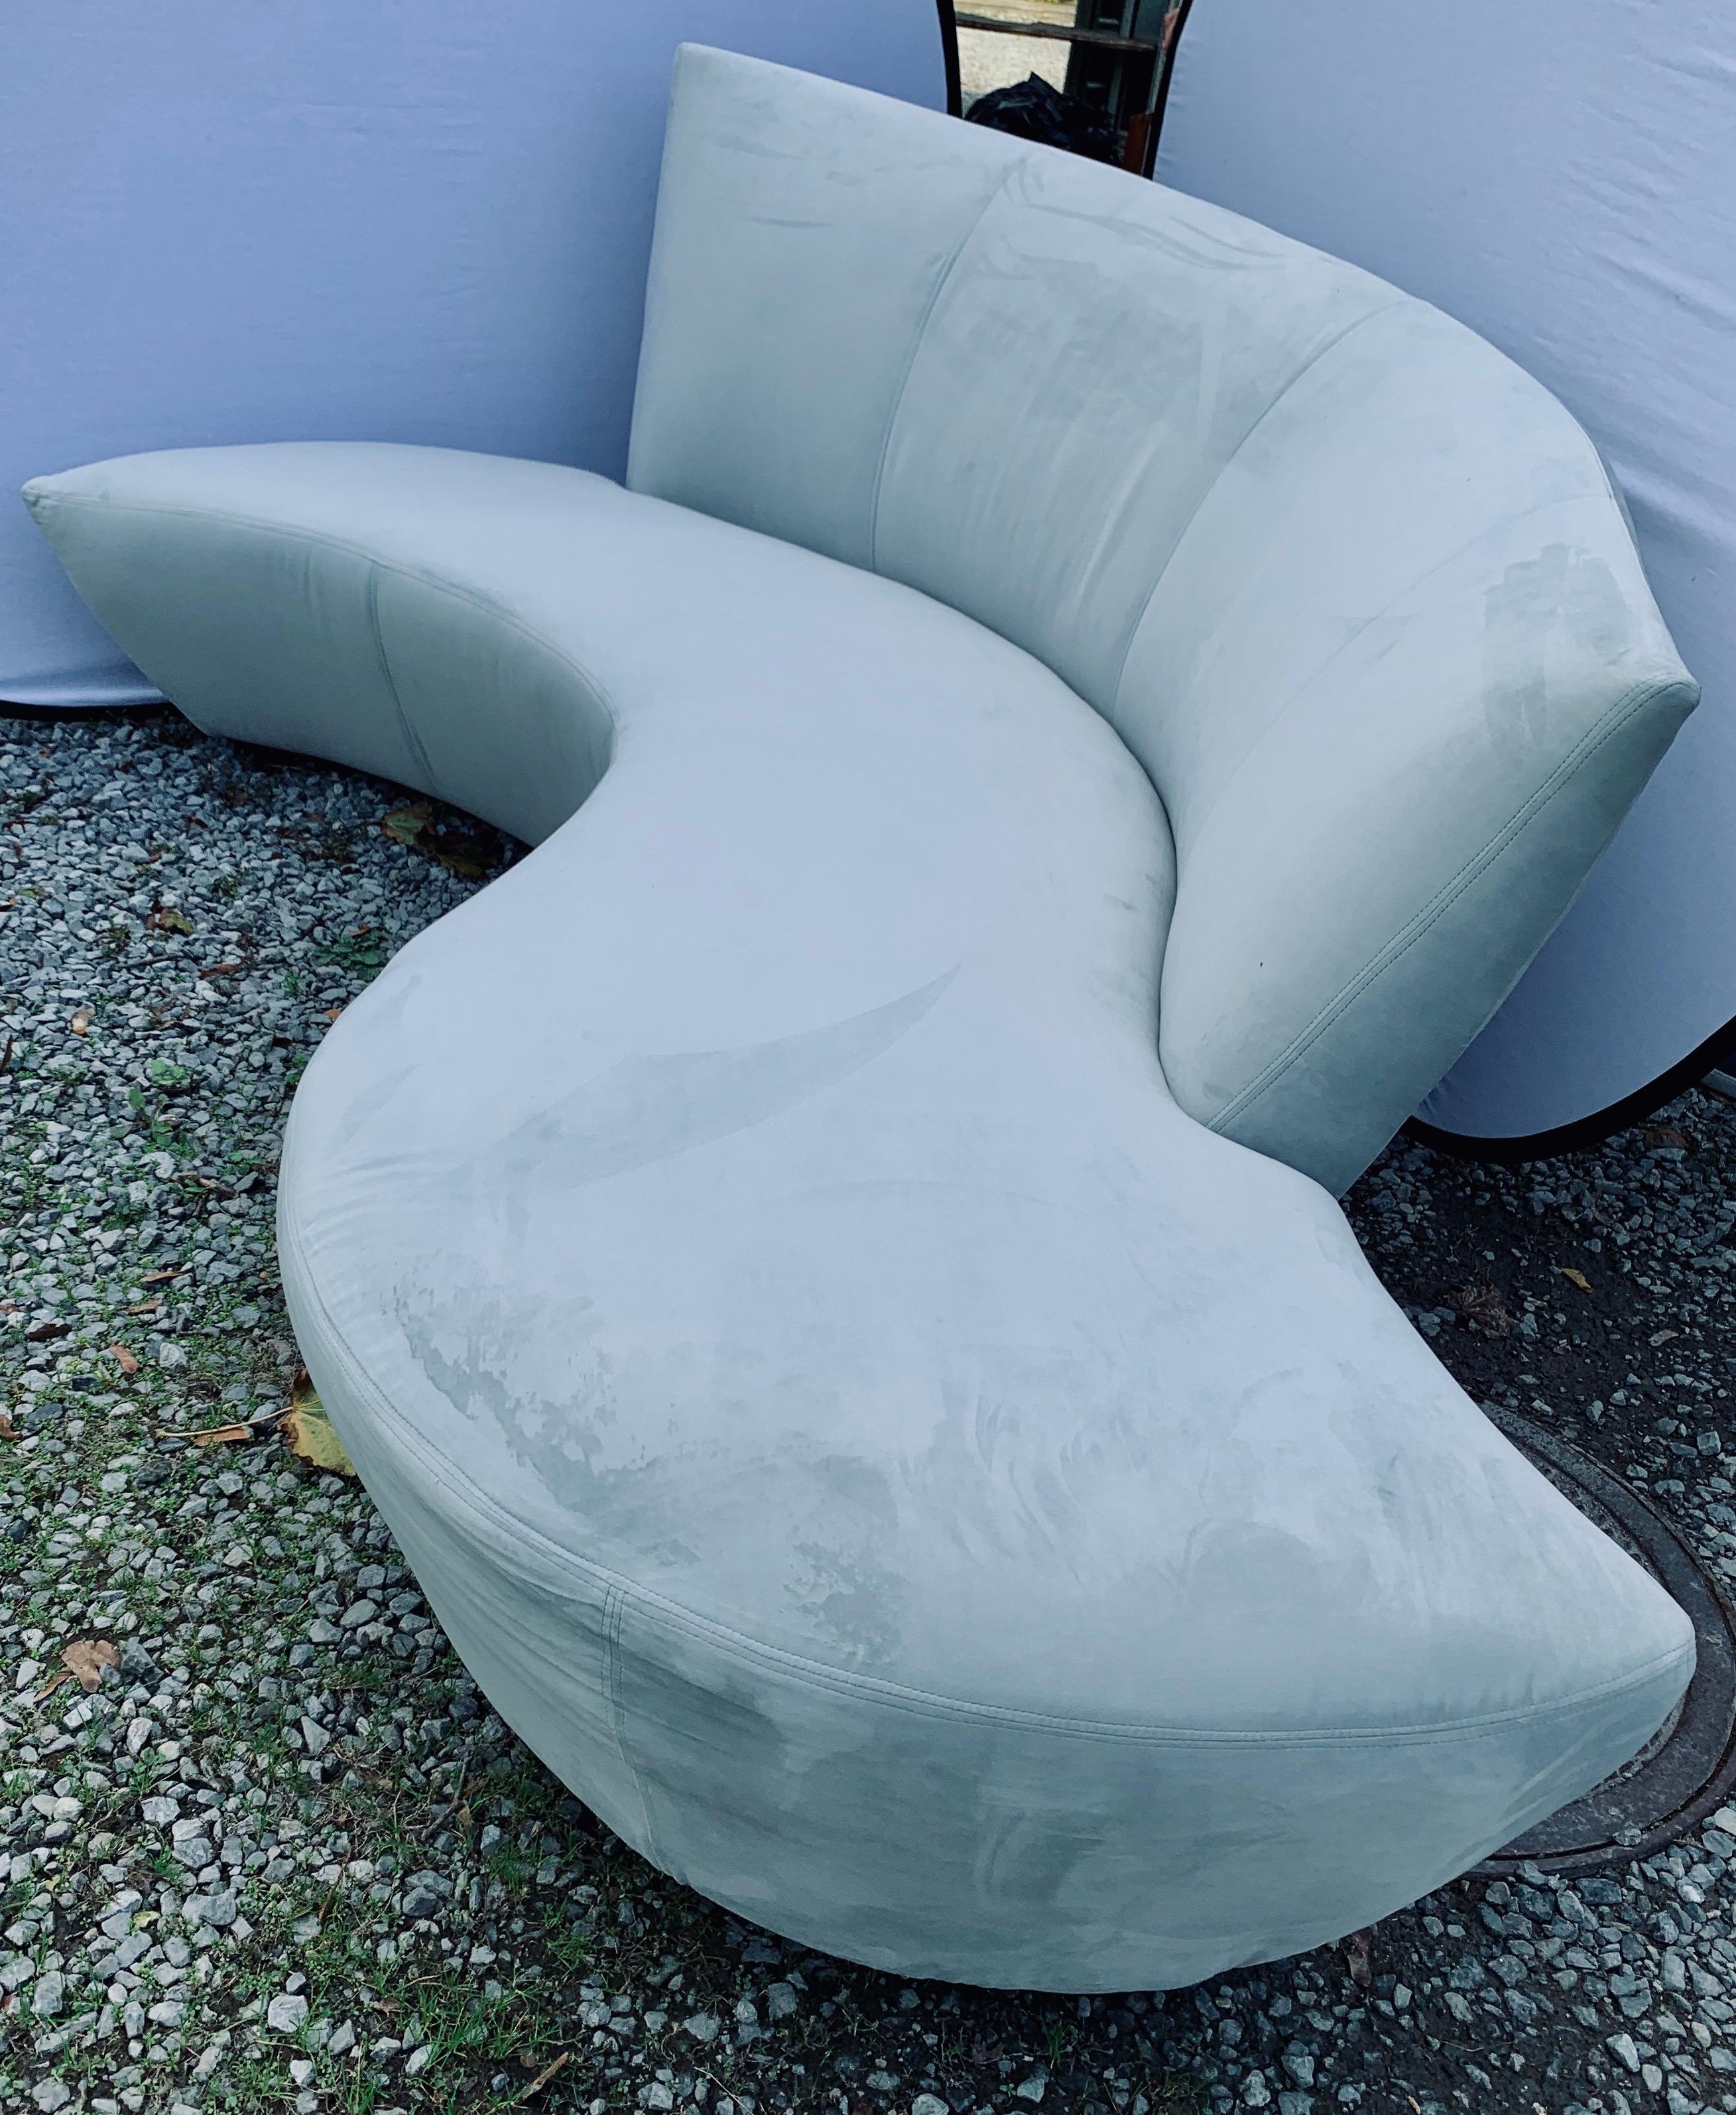 A matching pair of sculptural Mid-Century Modern style sofas designed by Vladimir Kagan and inspired by the curves and undulations of the Guggenheim Museum in Bilbao Spain. They were both newly reupholstered last year and are stunning. Rare to see